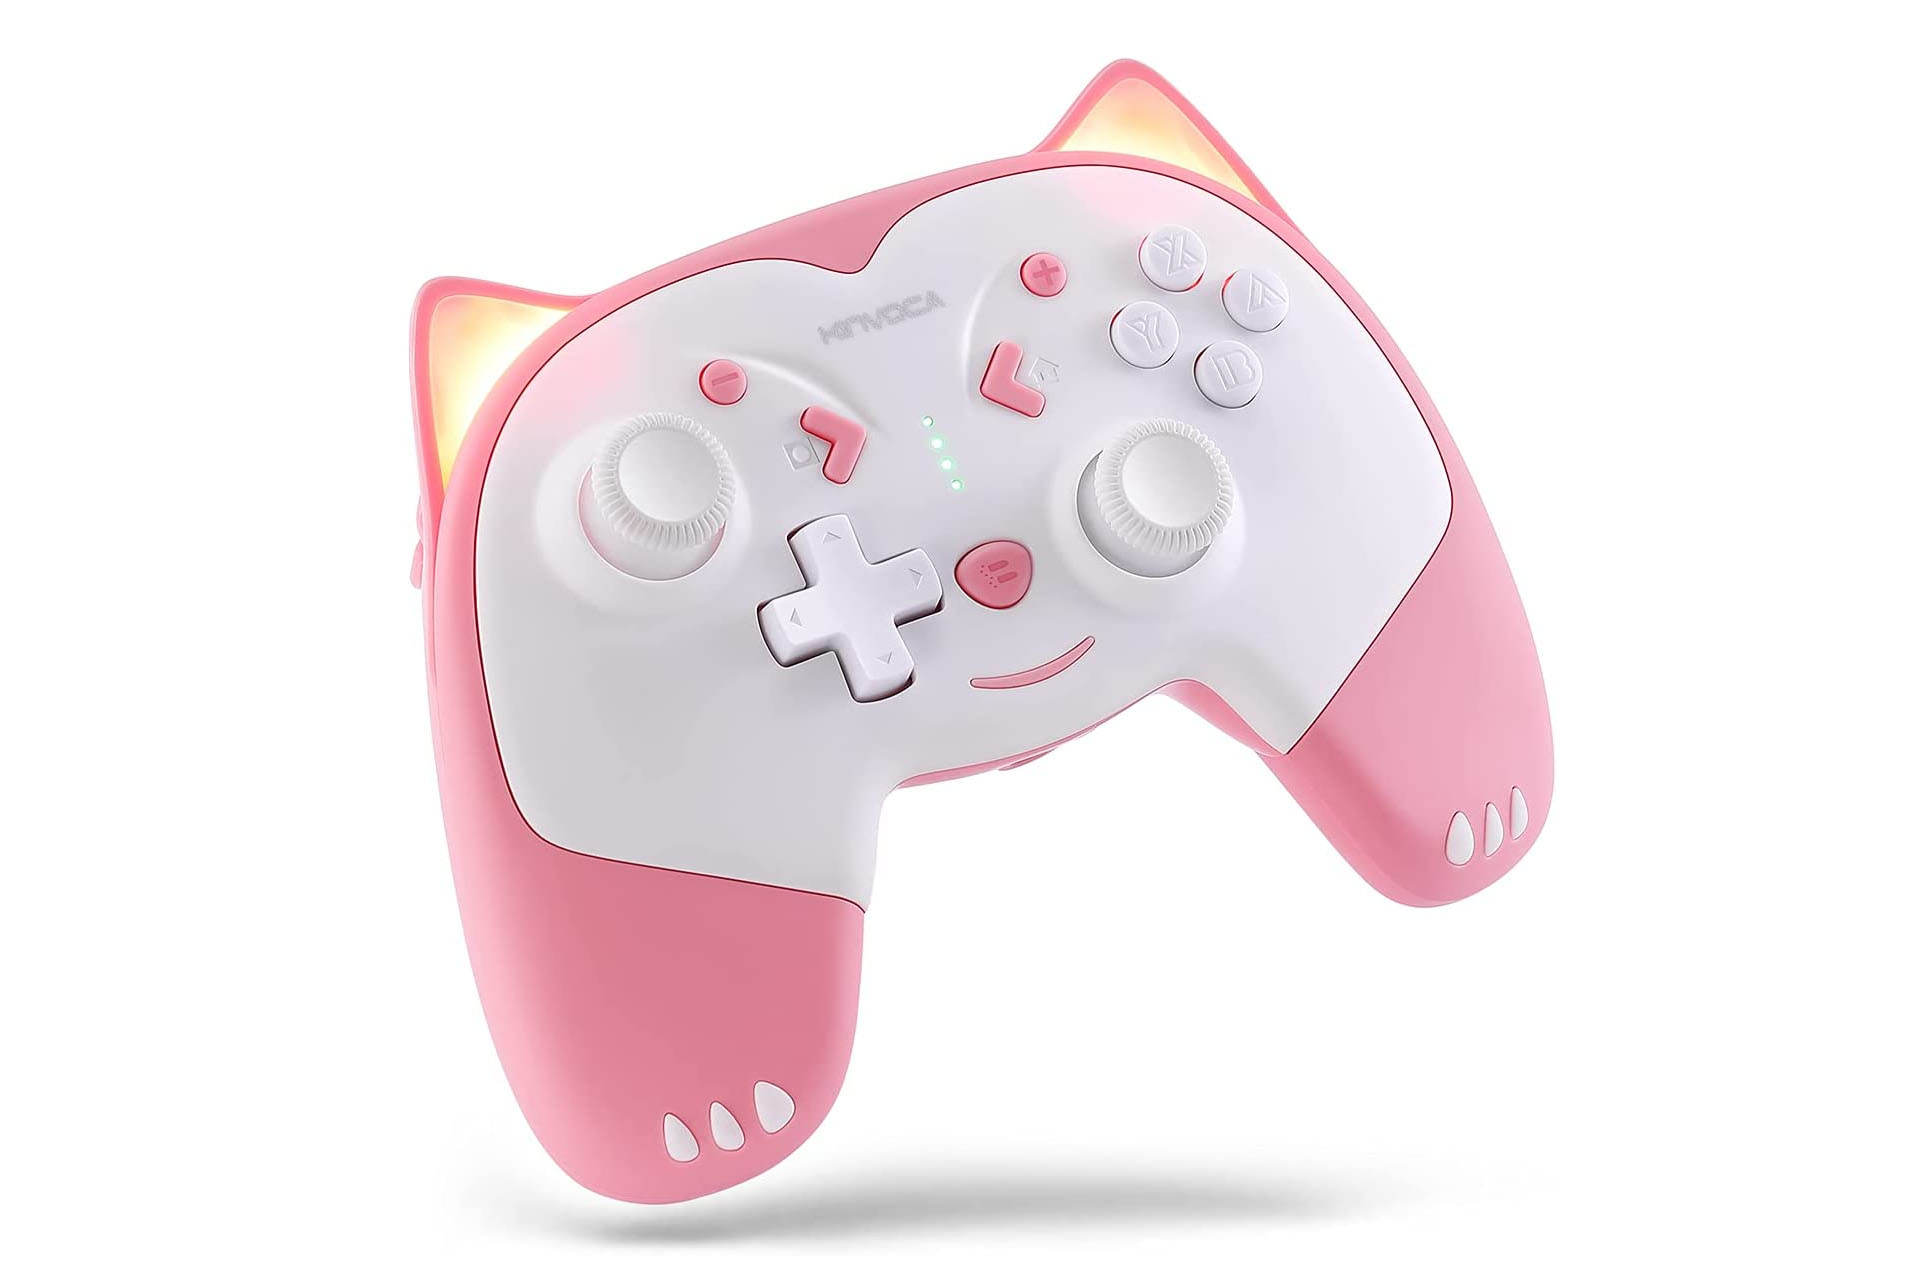 A product shot of the KINVOCA pink wireless controller on a white background